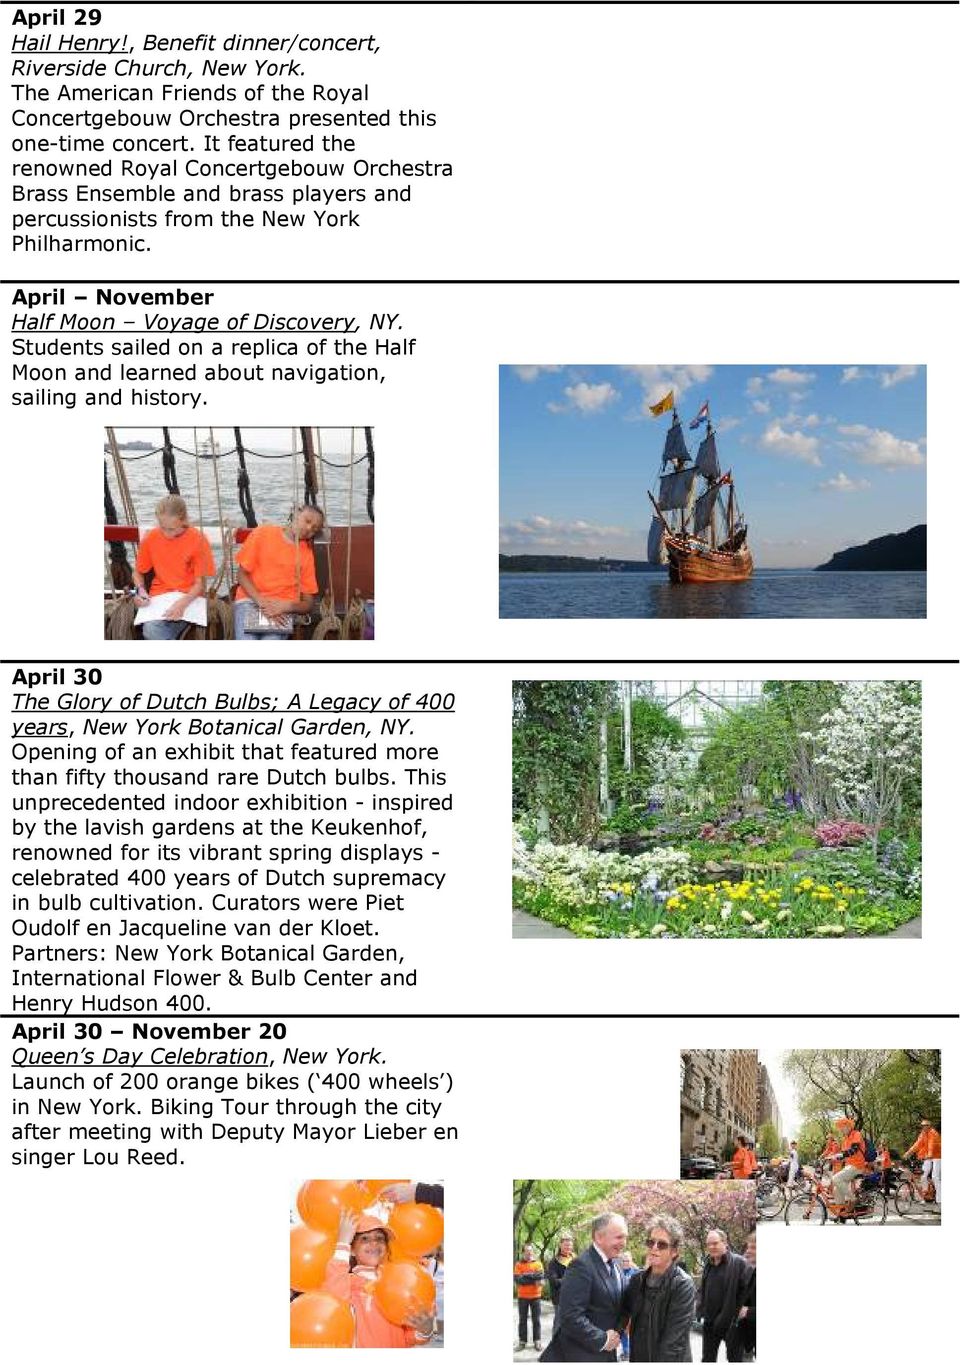 Students sailed on a replica of the Half Moon and learned about navigation, sailing and history. April 30 The Glory of Dutch Bulbs; A Legacy of 400 years, New York Botanical Garden, NY.